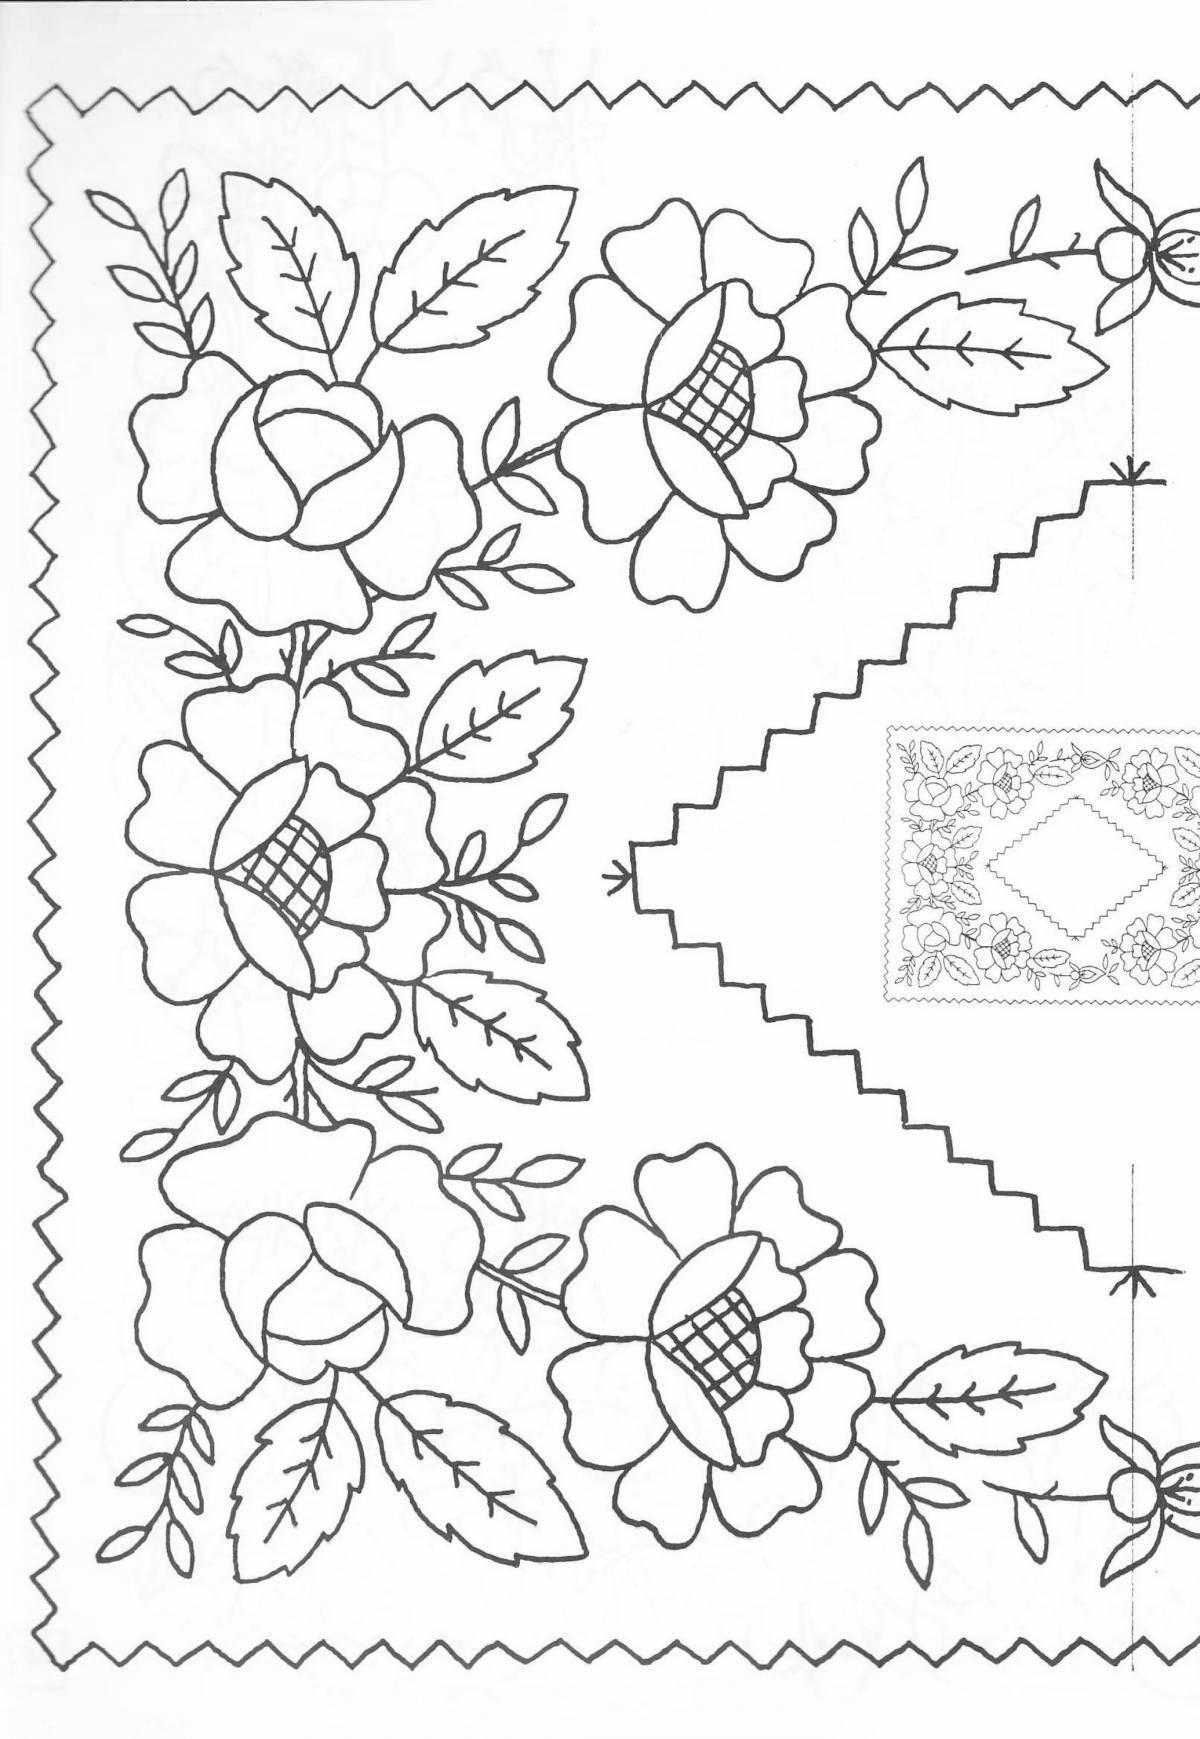 Cute Belarusian towels coloring pages for kids